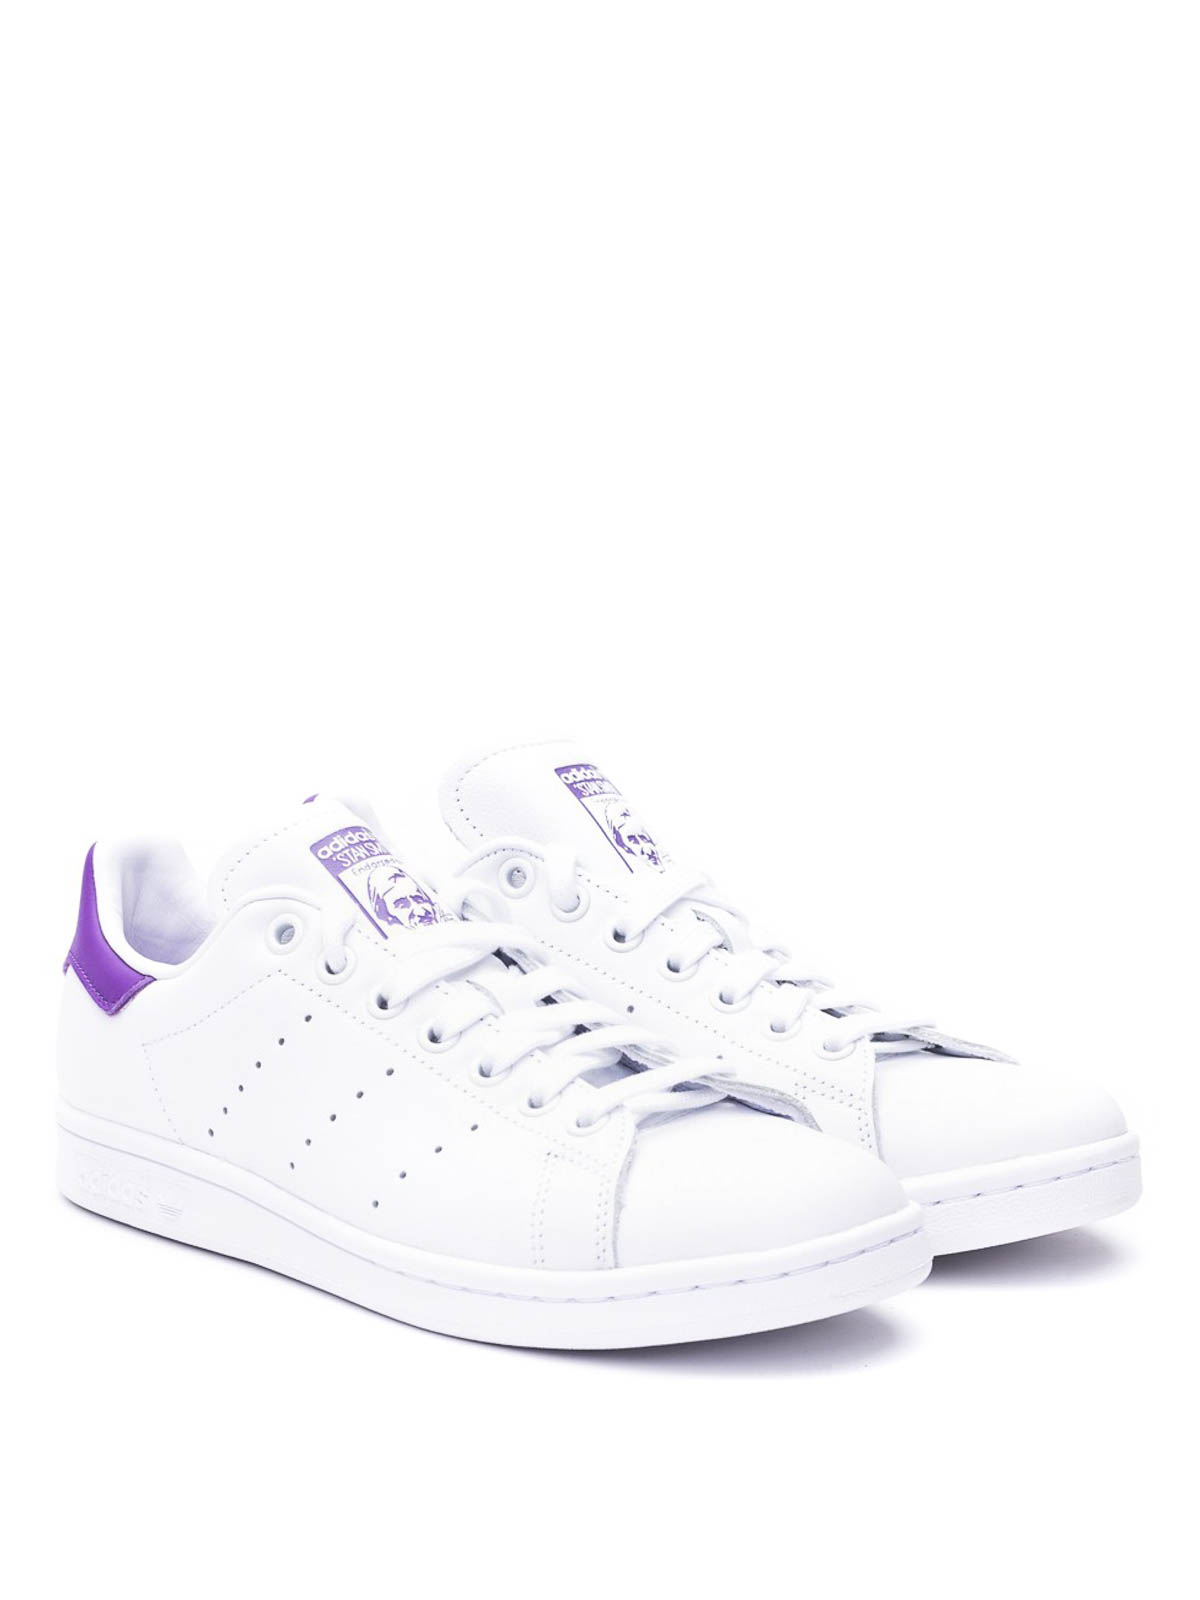 Stan Smith white and purple sneakers 